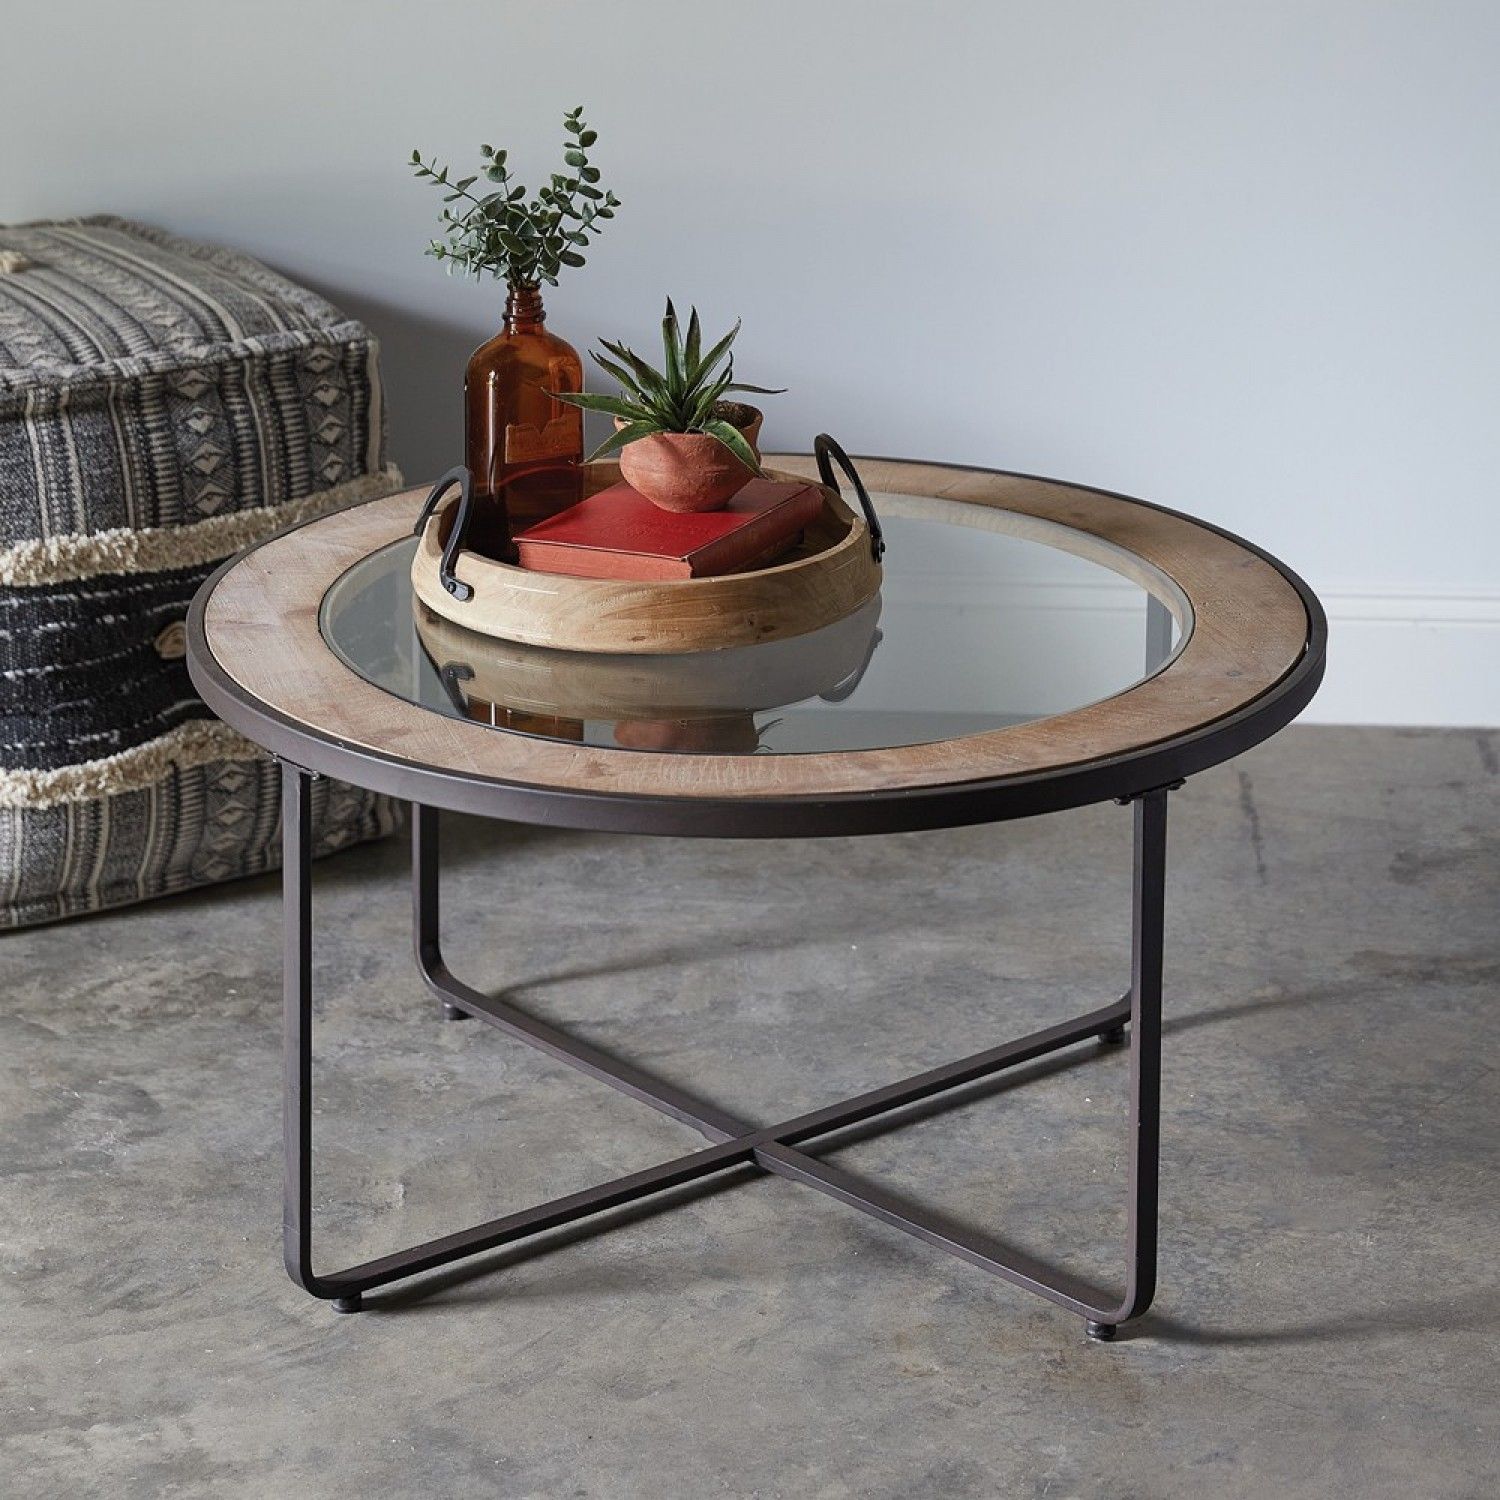 Small Industrial Round Coffee Table With Wood & Glass Top Intended For Round Industrial Coffee Tables (View 17 of 20)